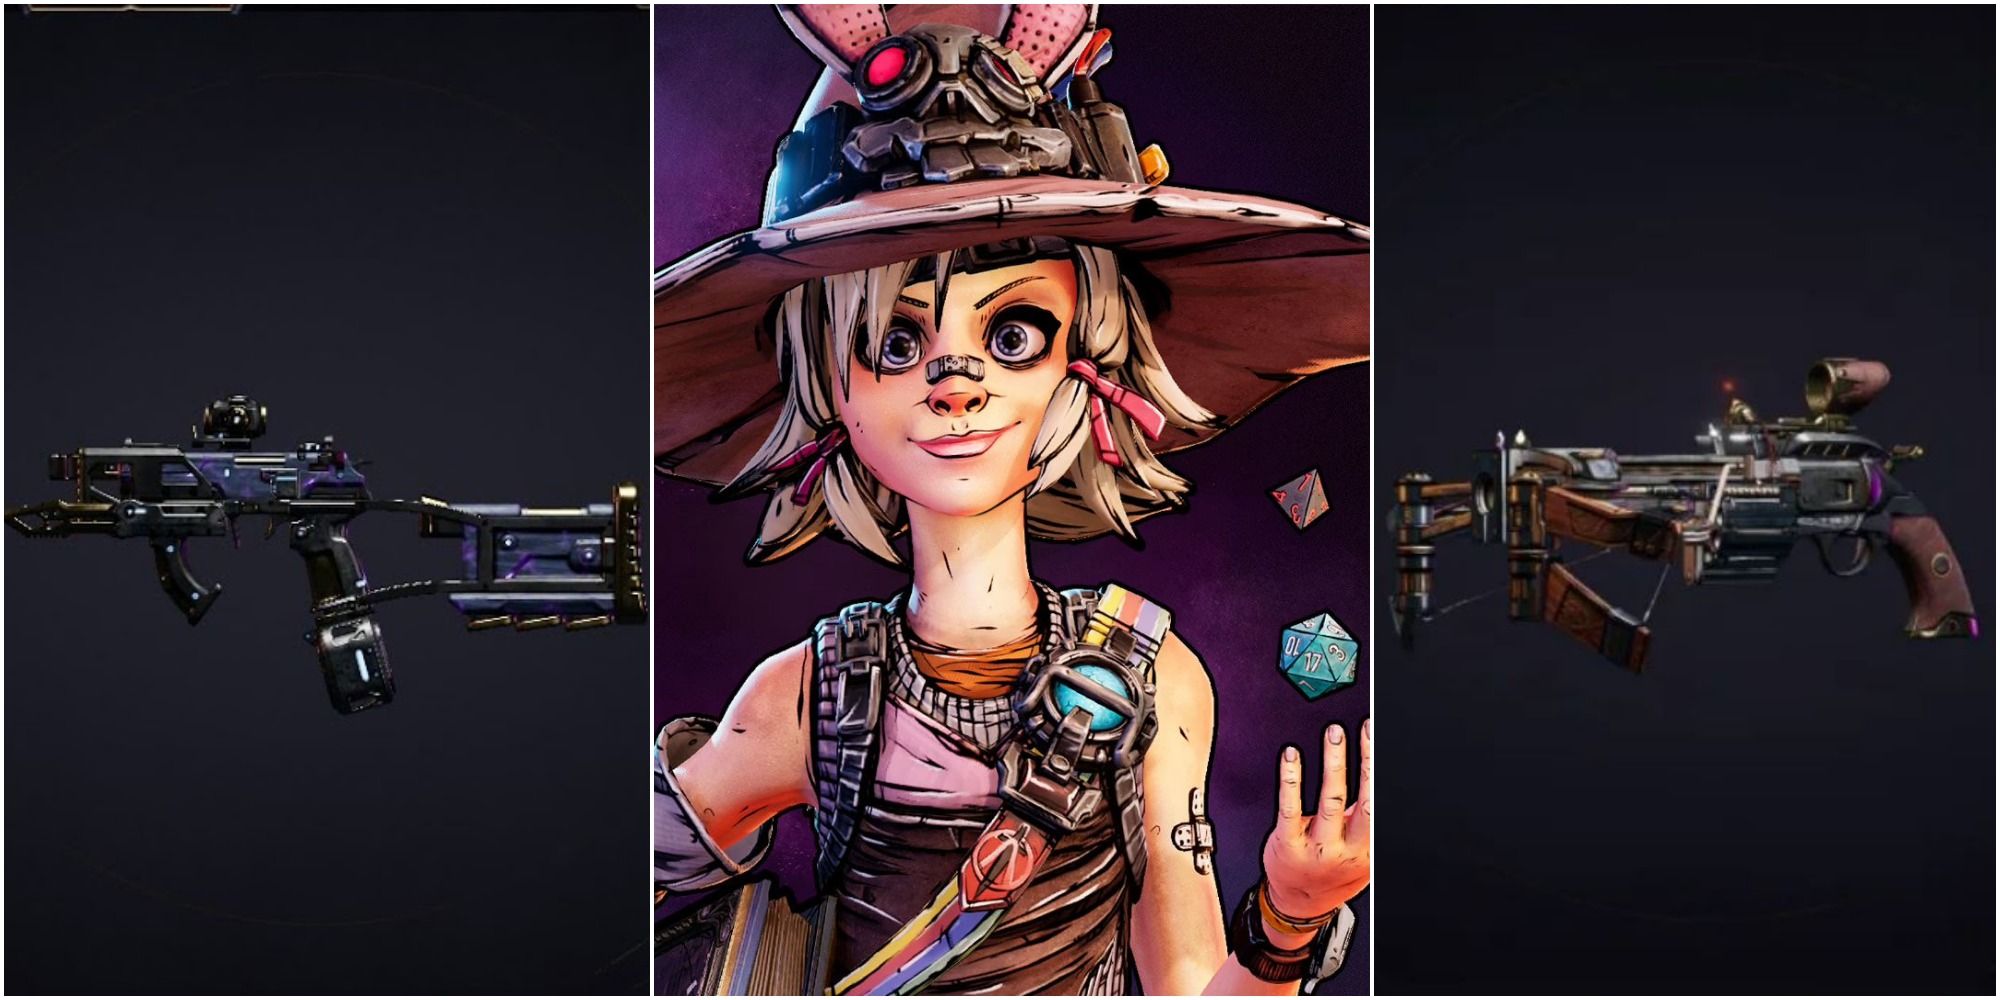 A split image from left to right: Perceiver pistol, Tiny throwing dice into the air, and Masterwork Handbow Pistol